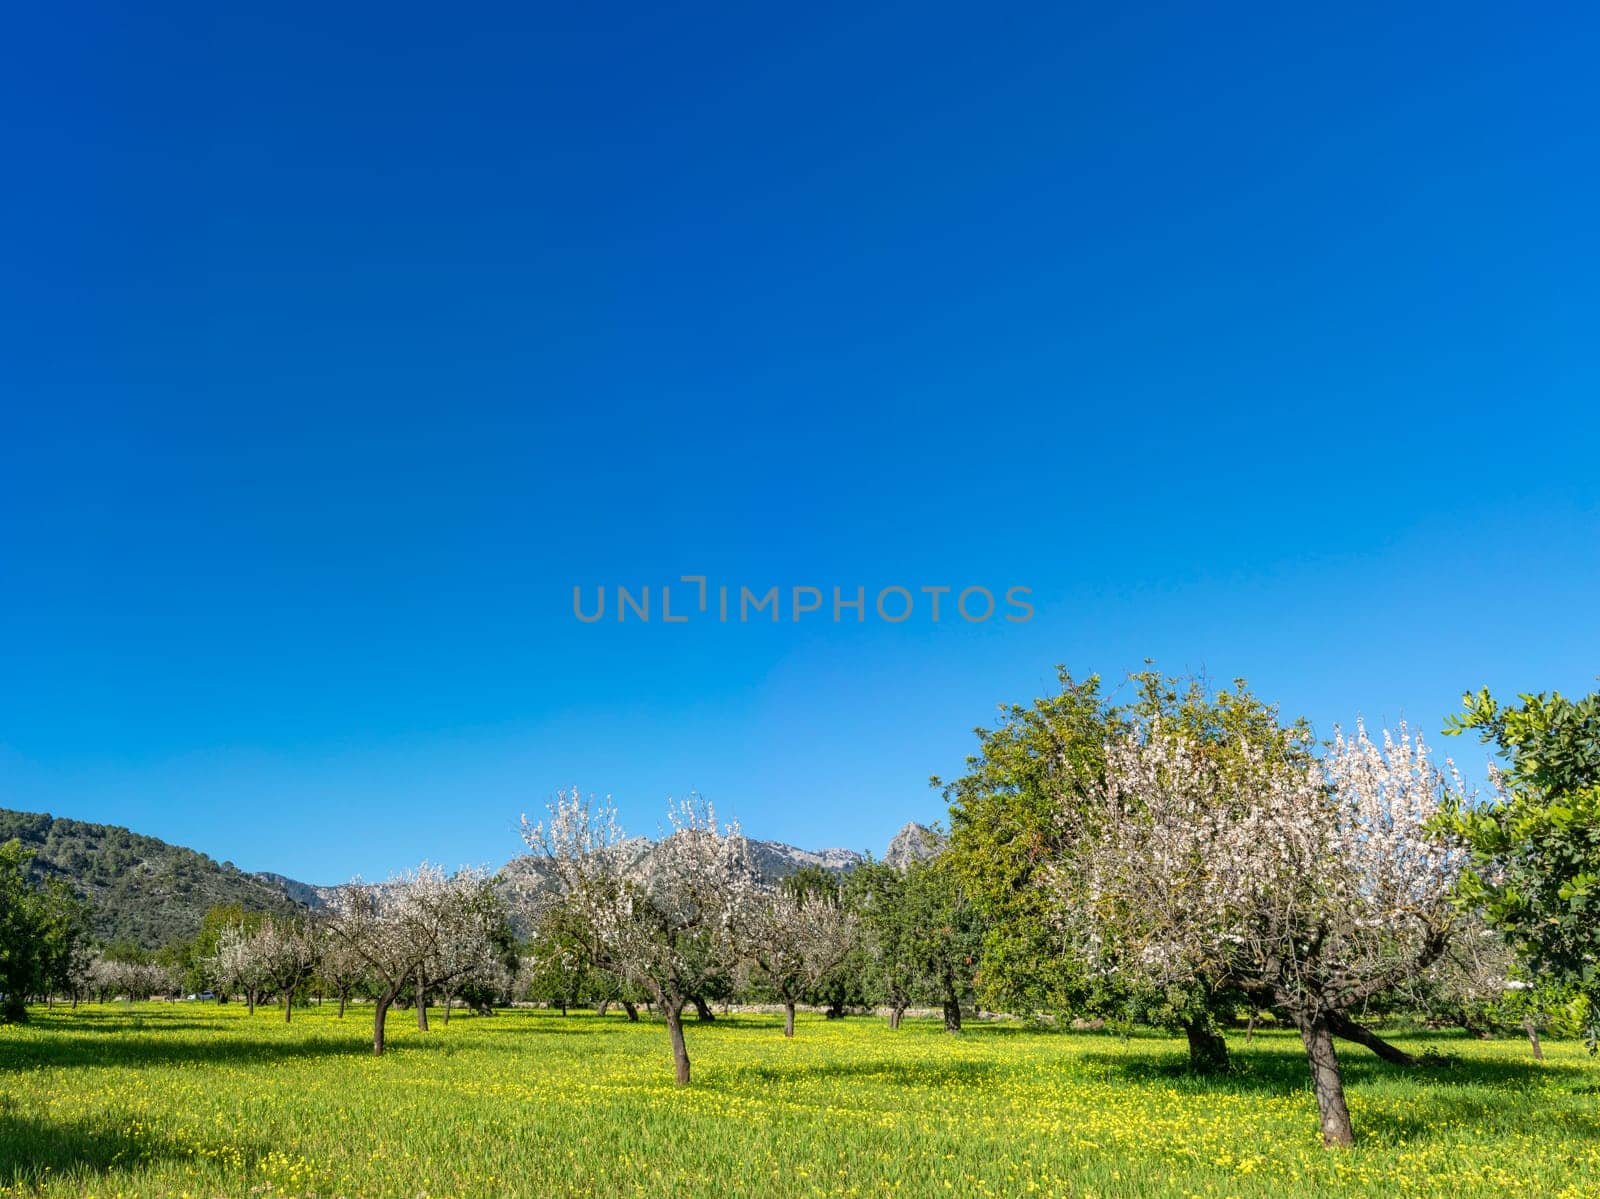 A carpet of yellow wildflowers complements the white blossoms of almond trees in this vibrant orchard. Nestled at the foot of rolling hills, the landscape is a symphony of color under the expansive azure sky, a testament to the vitality of spring.